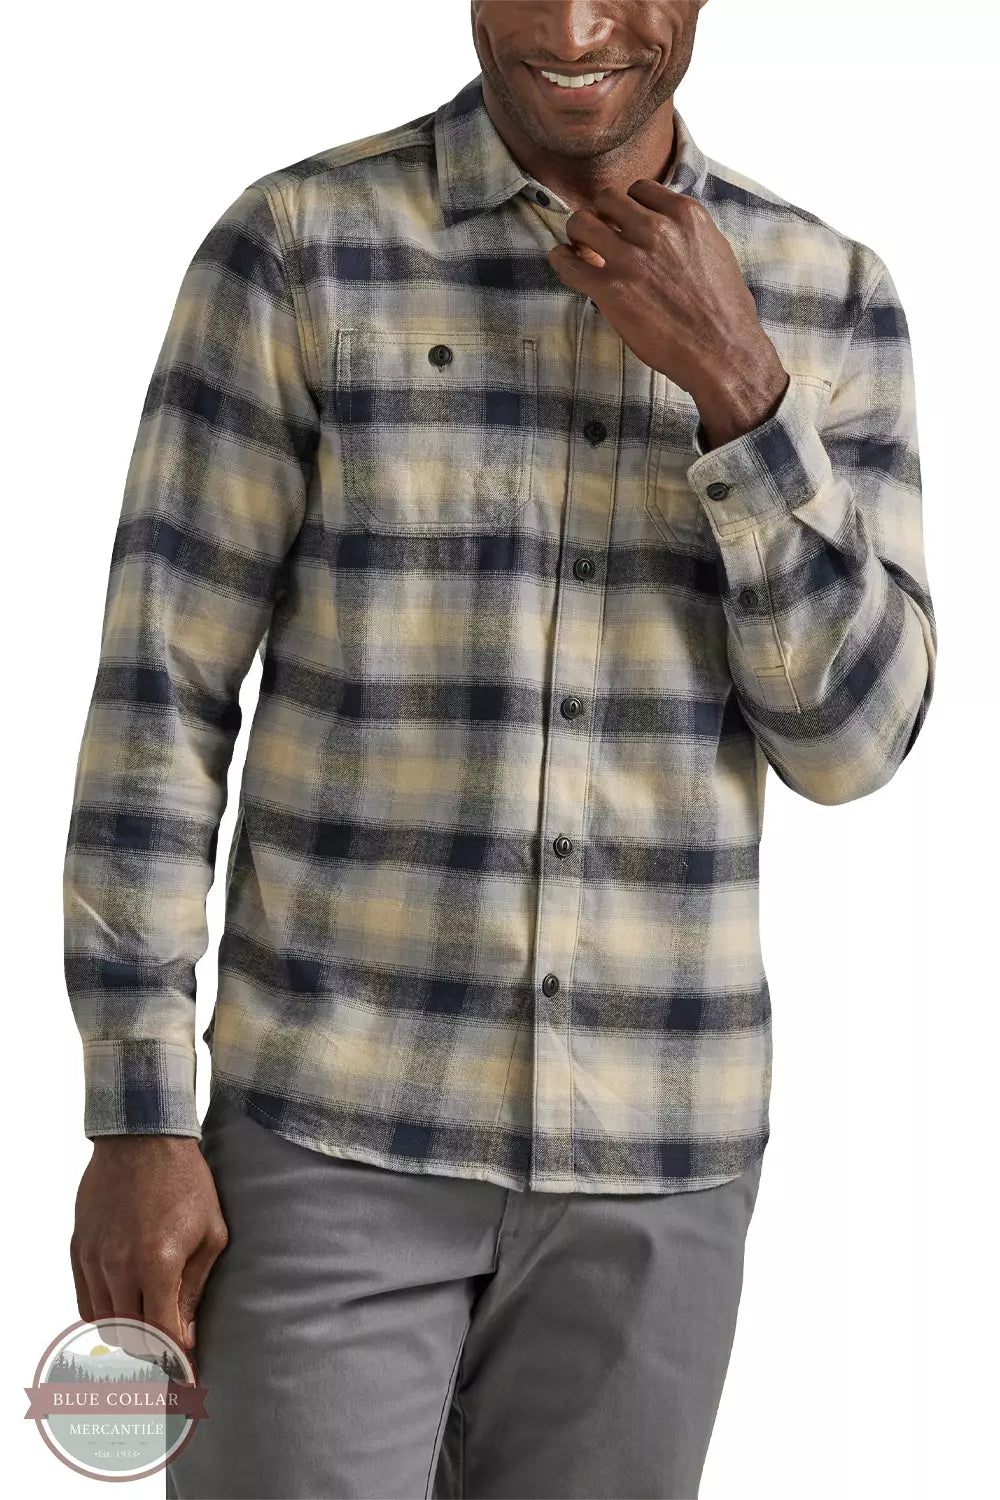 Lee 112339801 Extreme Motion Flannel Button Down Long Sleeve Shirt in Gray Plaid Front View